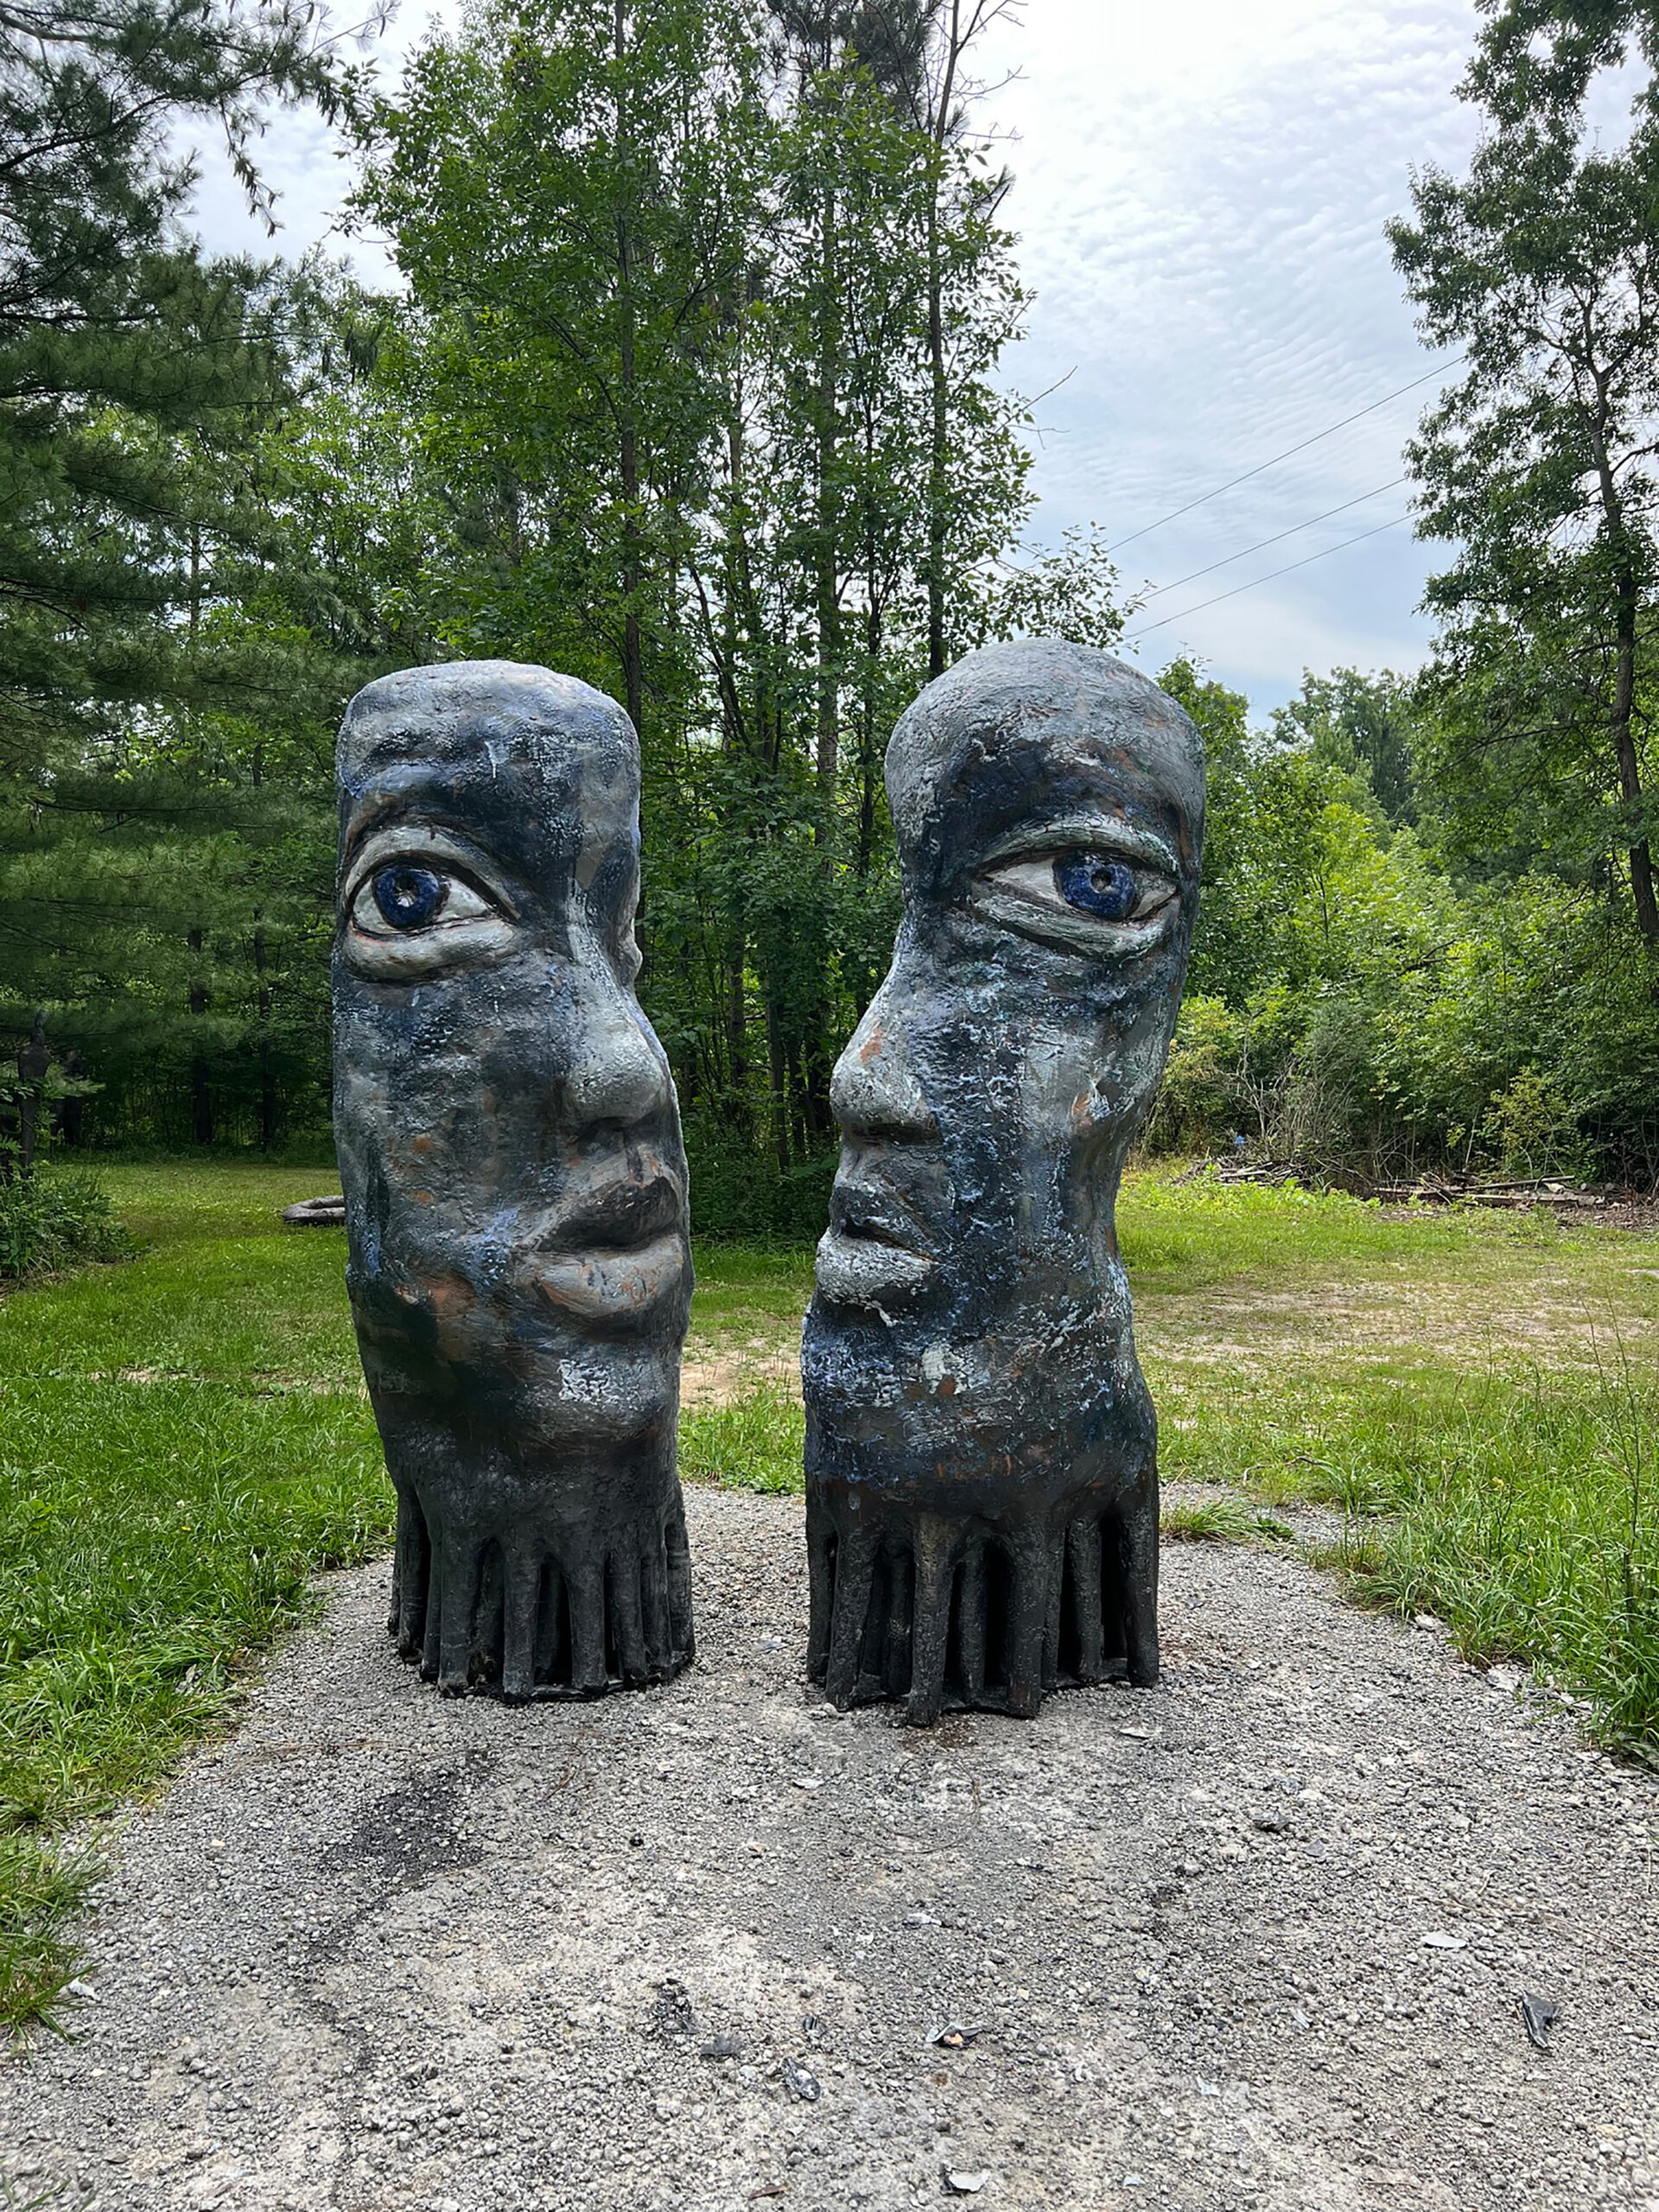 Mark Chatterley's outdoor sculpture, Human Collective, shows two large stone faces, each with one eye toward the camera